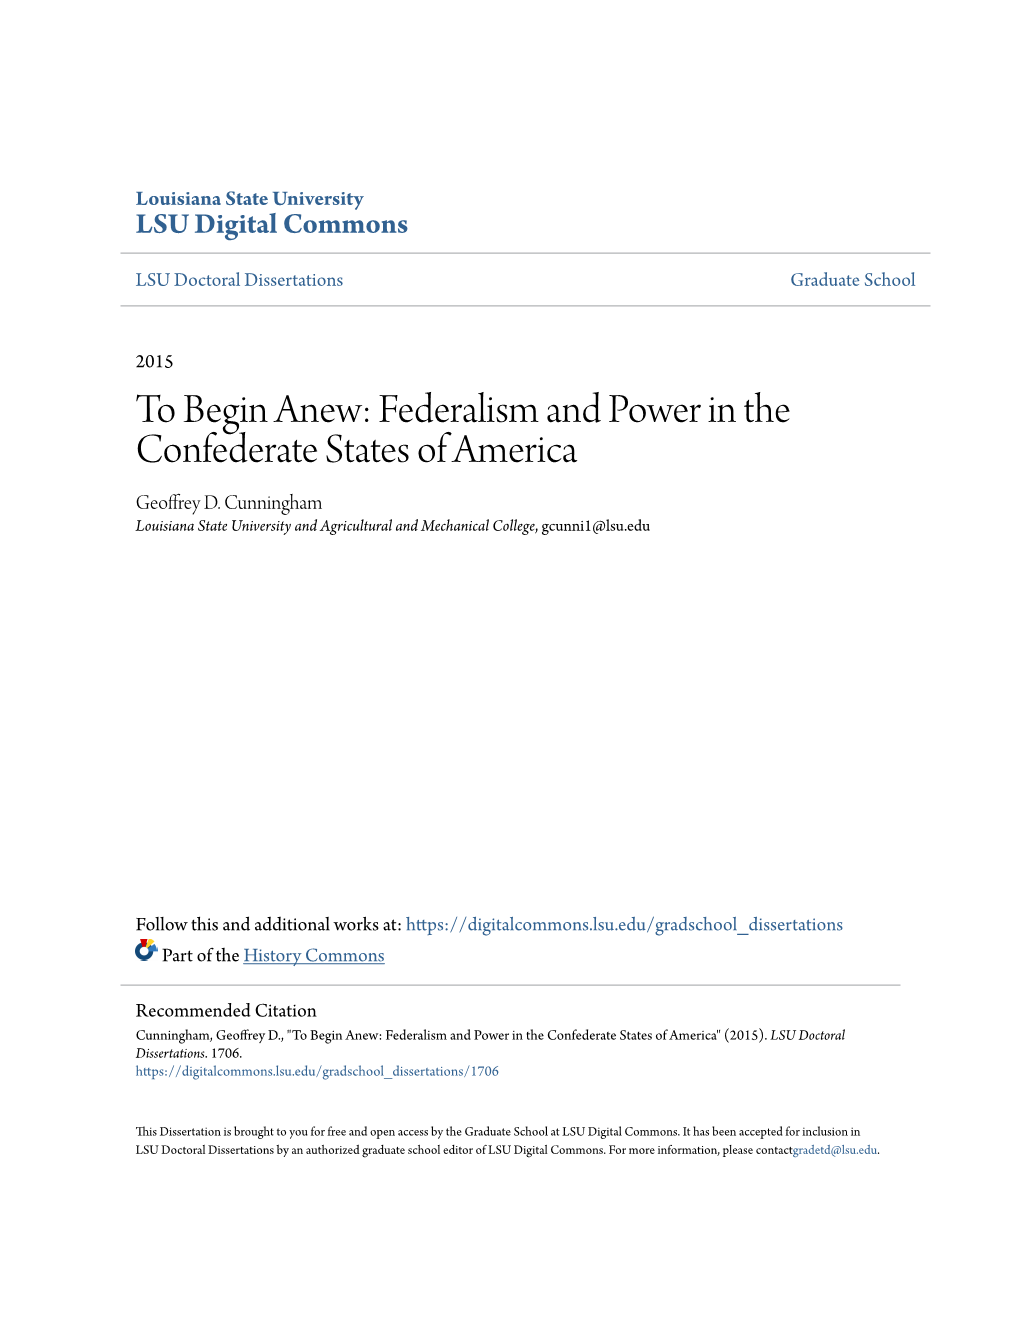 Federalism and Power in the Confederate States of America Geoffrey D